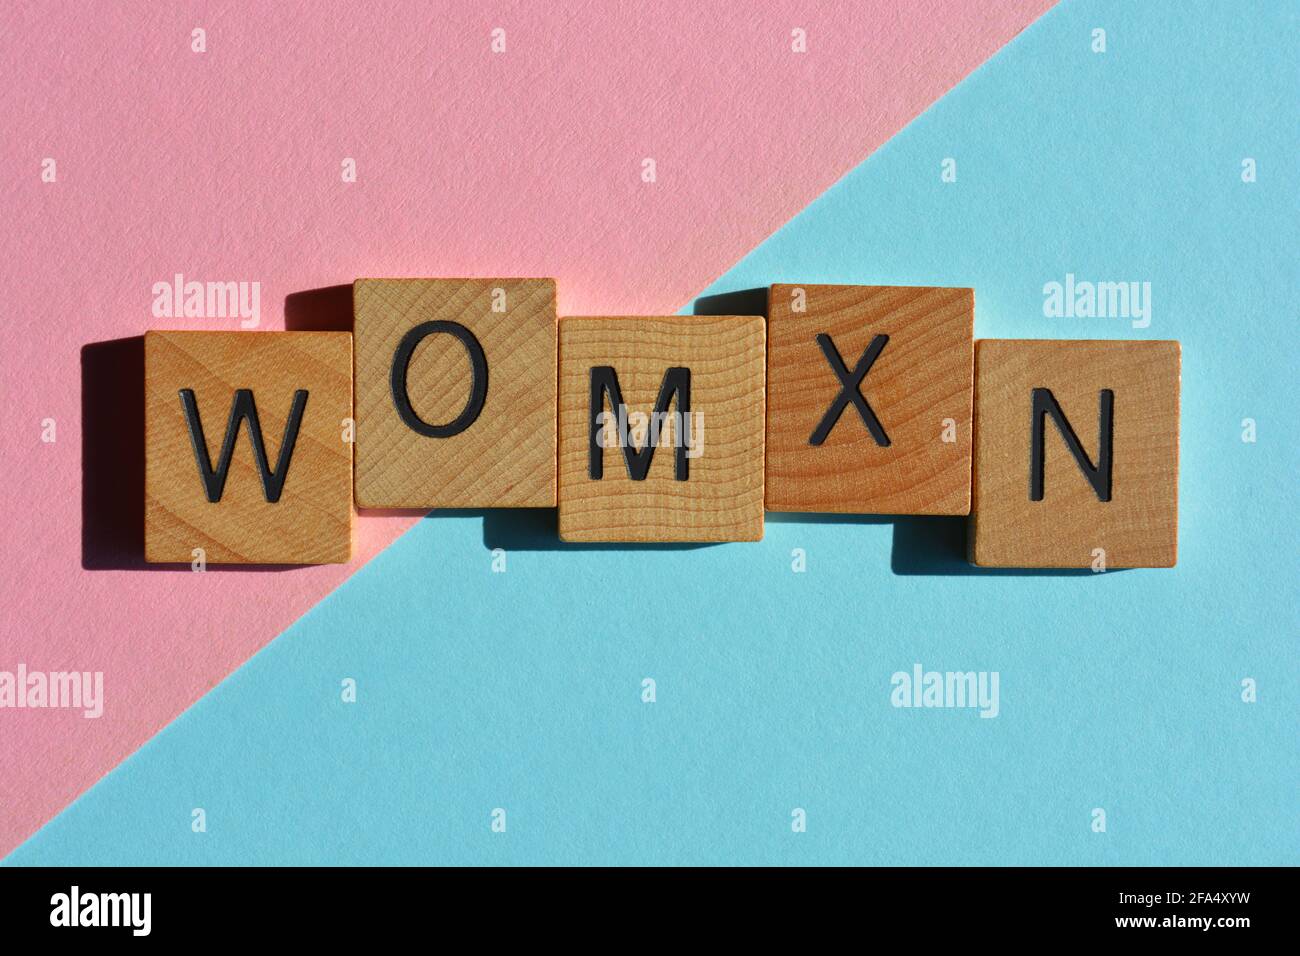 Womxn, an alternative intersectional spelling of the word woman, Stock Photo